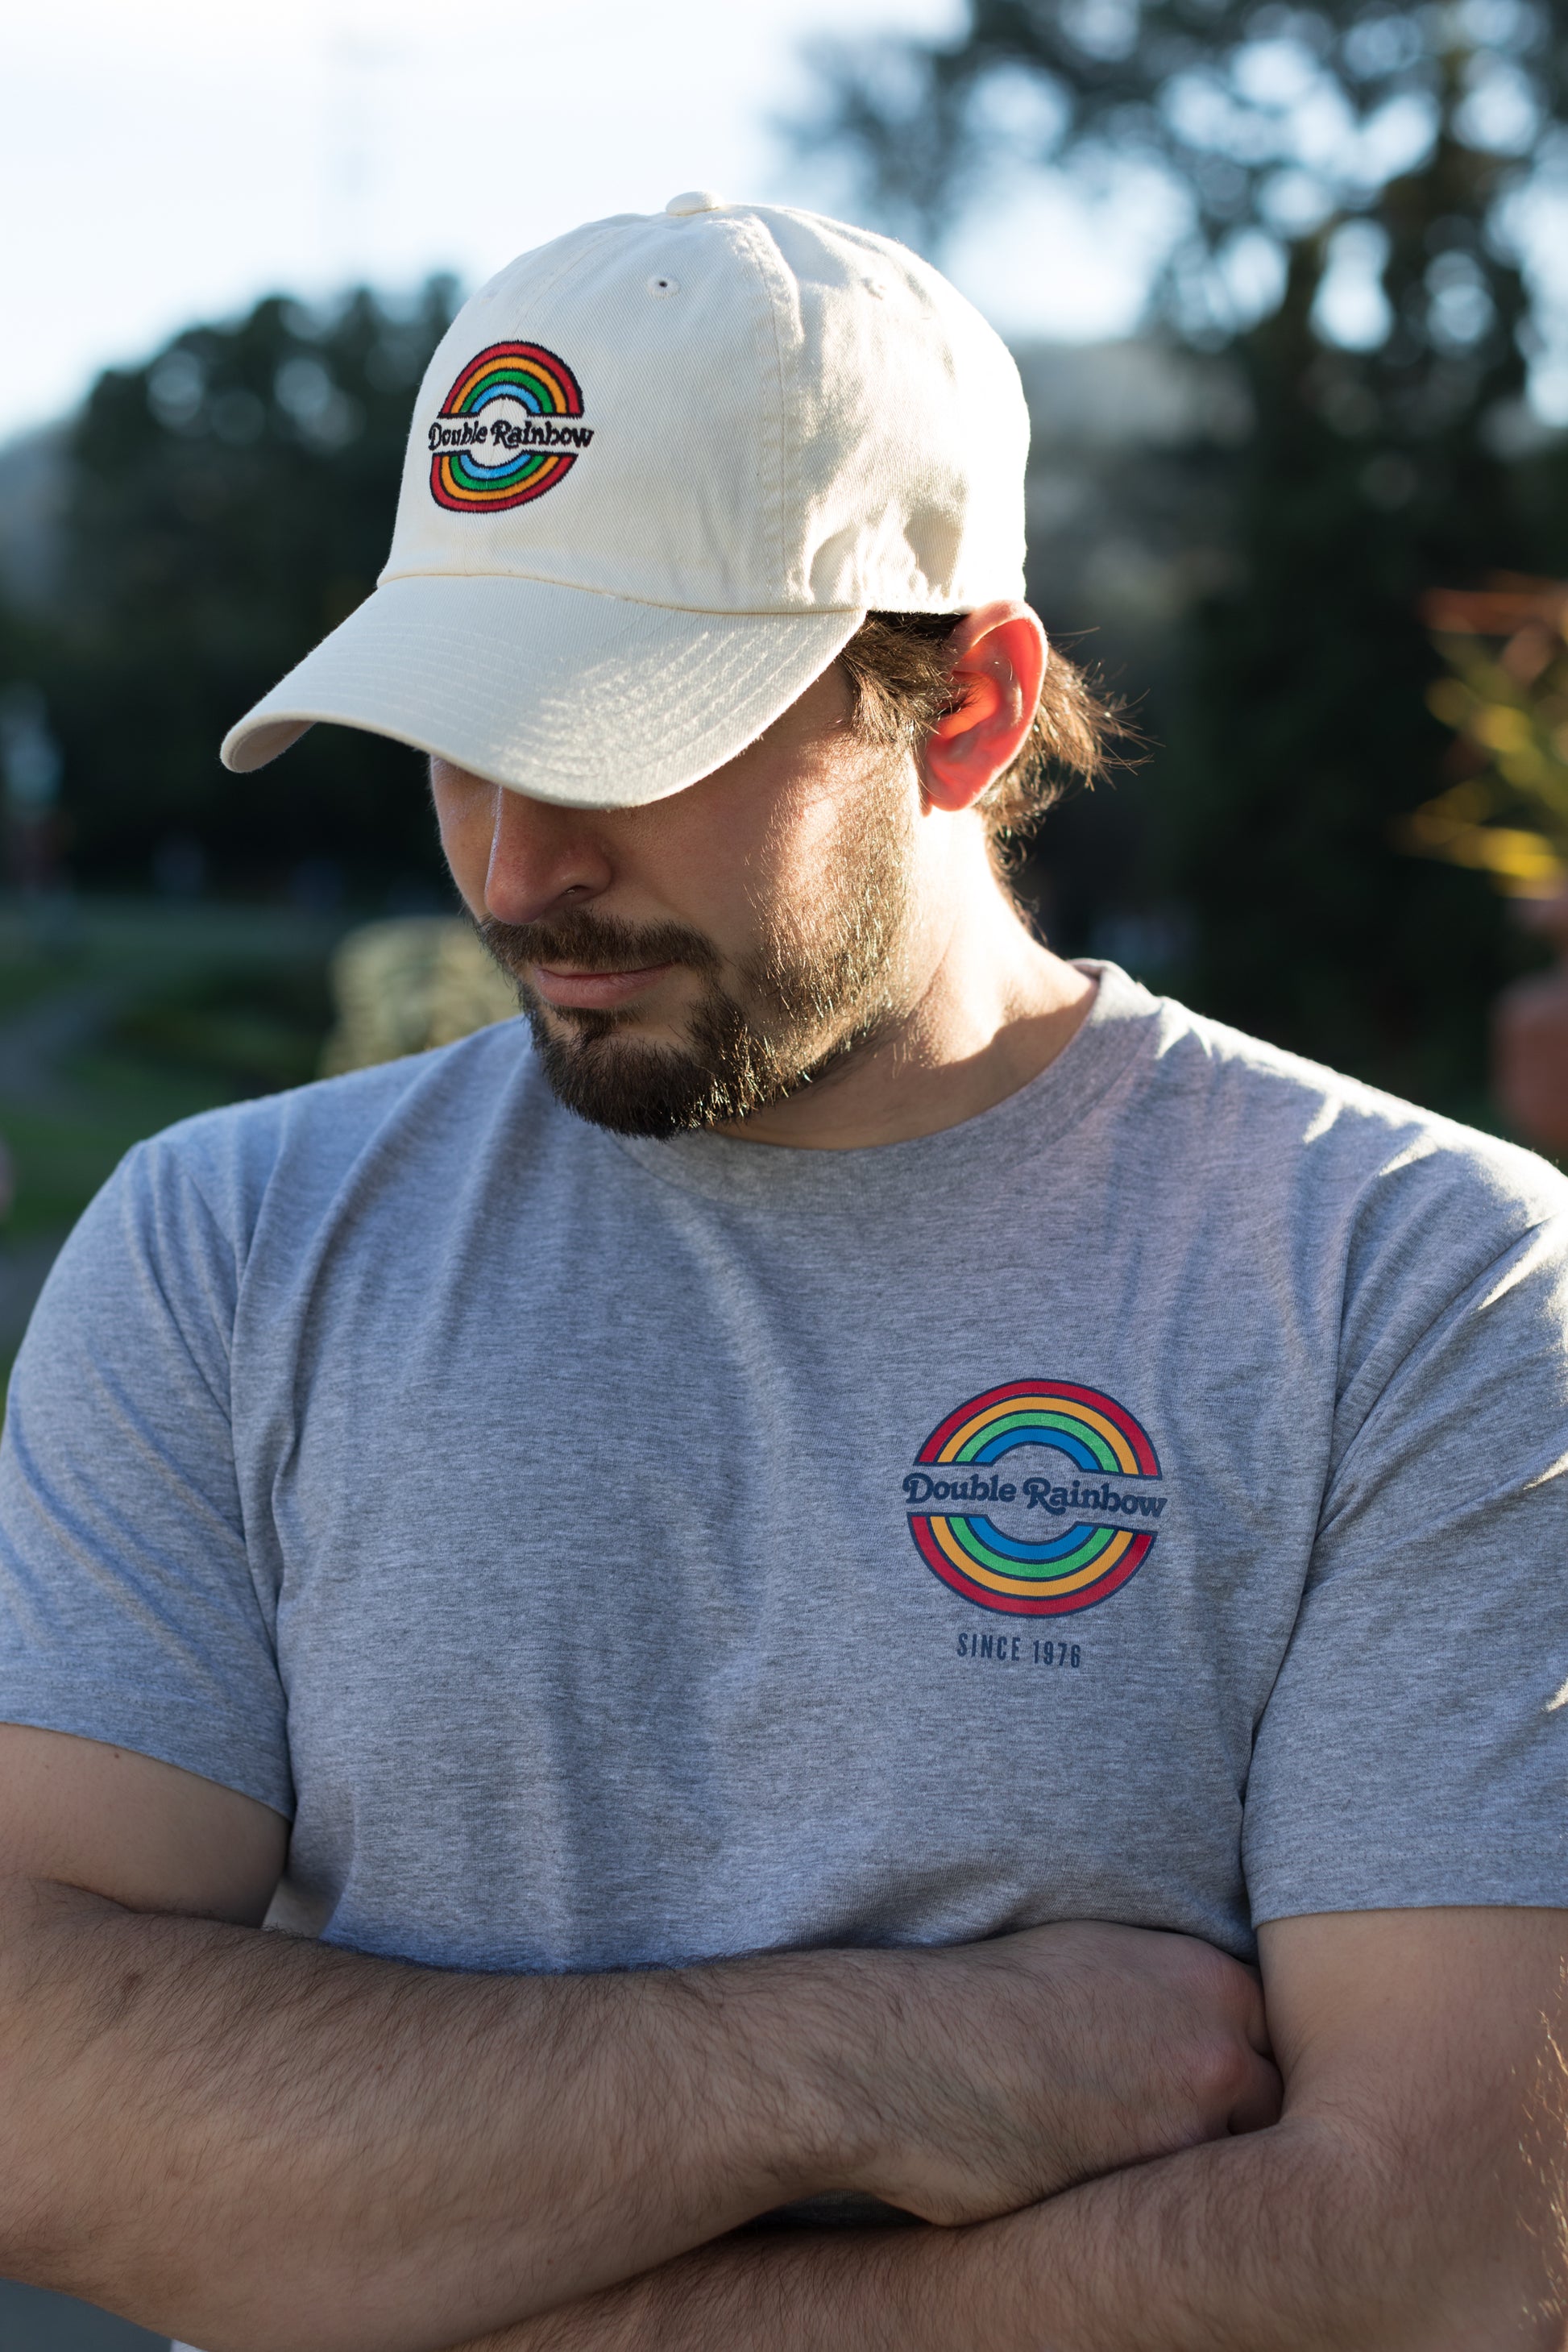 Double Rainbow T-Shirt and Hat